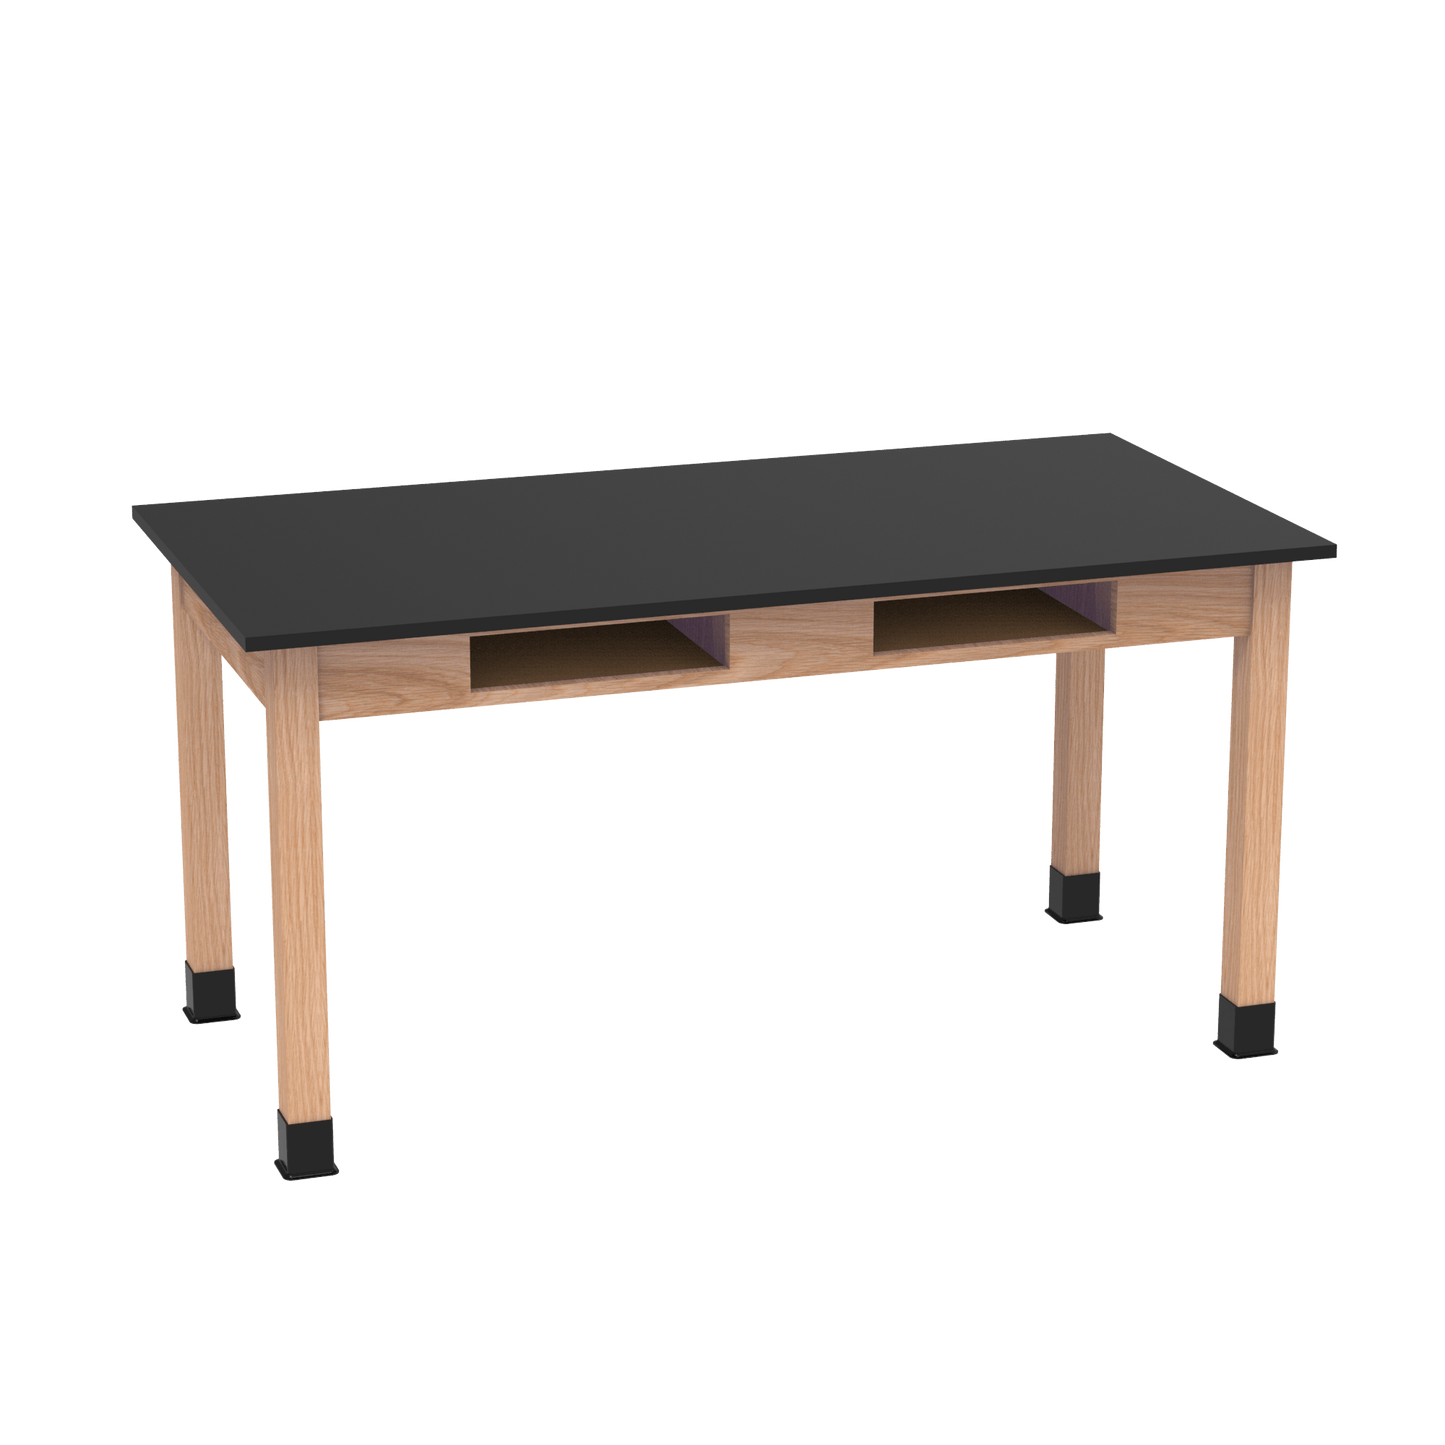 Diversified Woodcrafts Science Table w/ Book Compartment - 60" W x 30" D - Solid Oak Frame and Adjustable Glides - SchoolOutlet